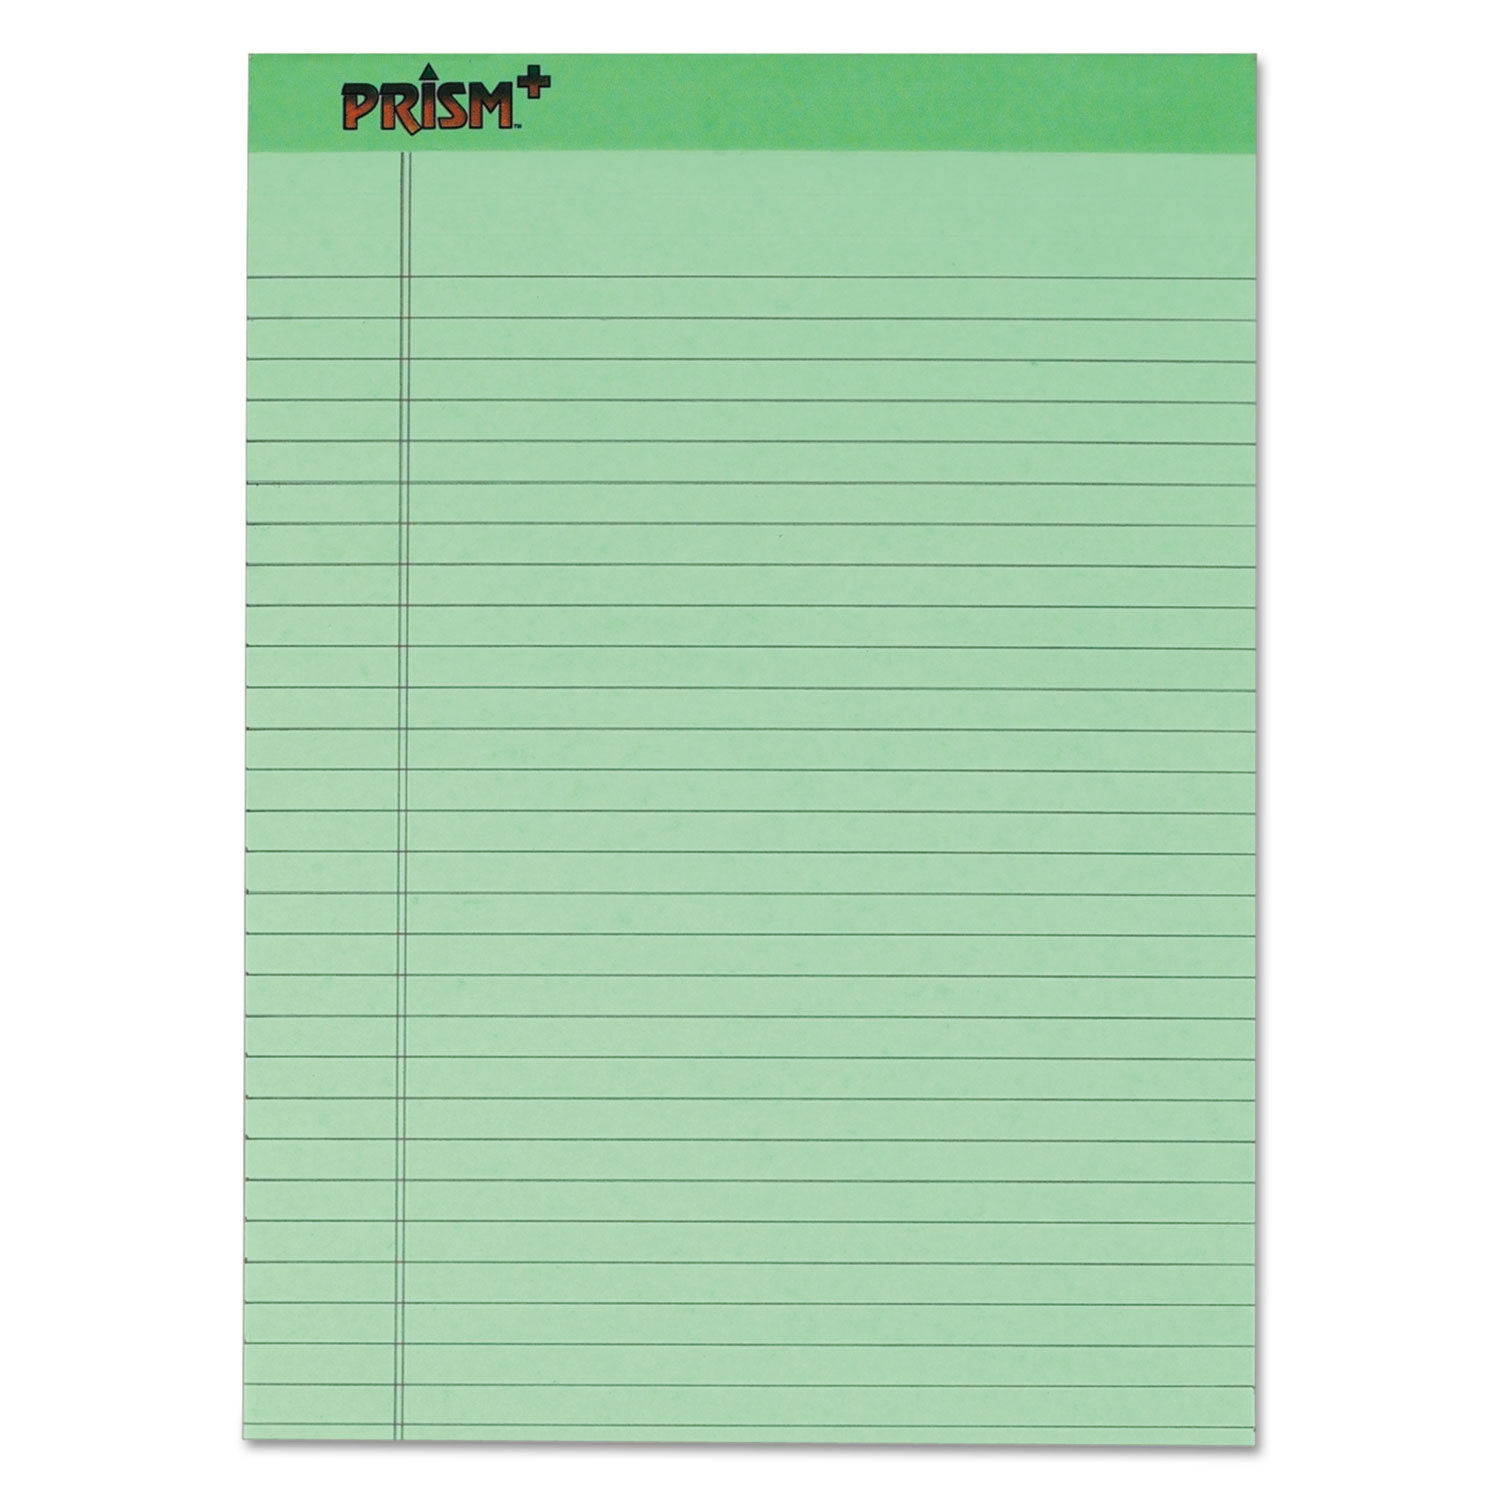  TOPS 63190 Prism + Colored Writing Pad, Wide/Legal Rule, 8.5 x 11.75, Green, 50 Sheets, 12/Pack (TOP63190) 